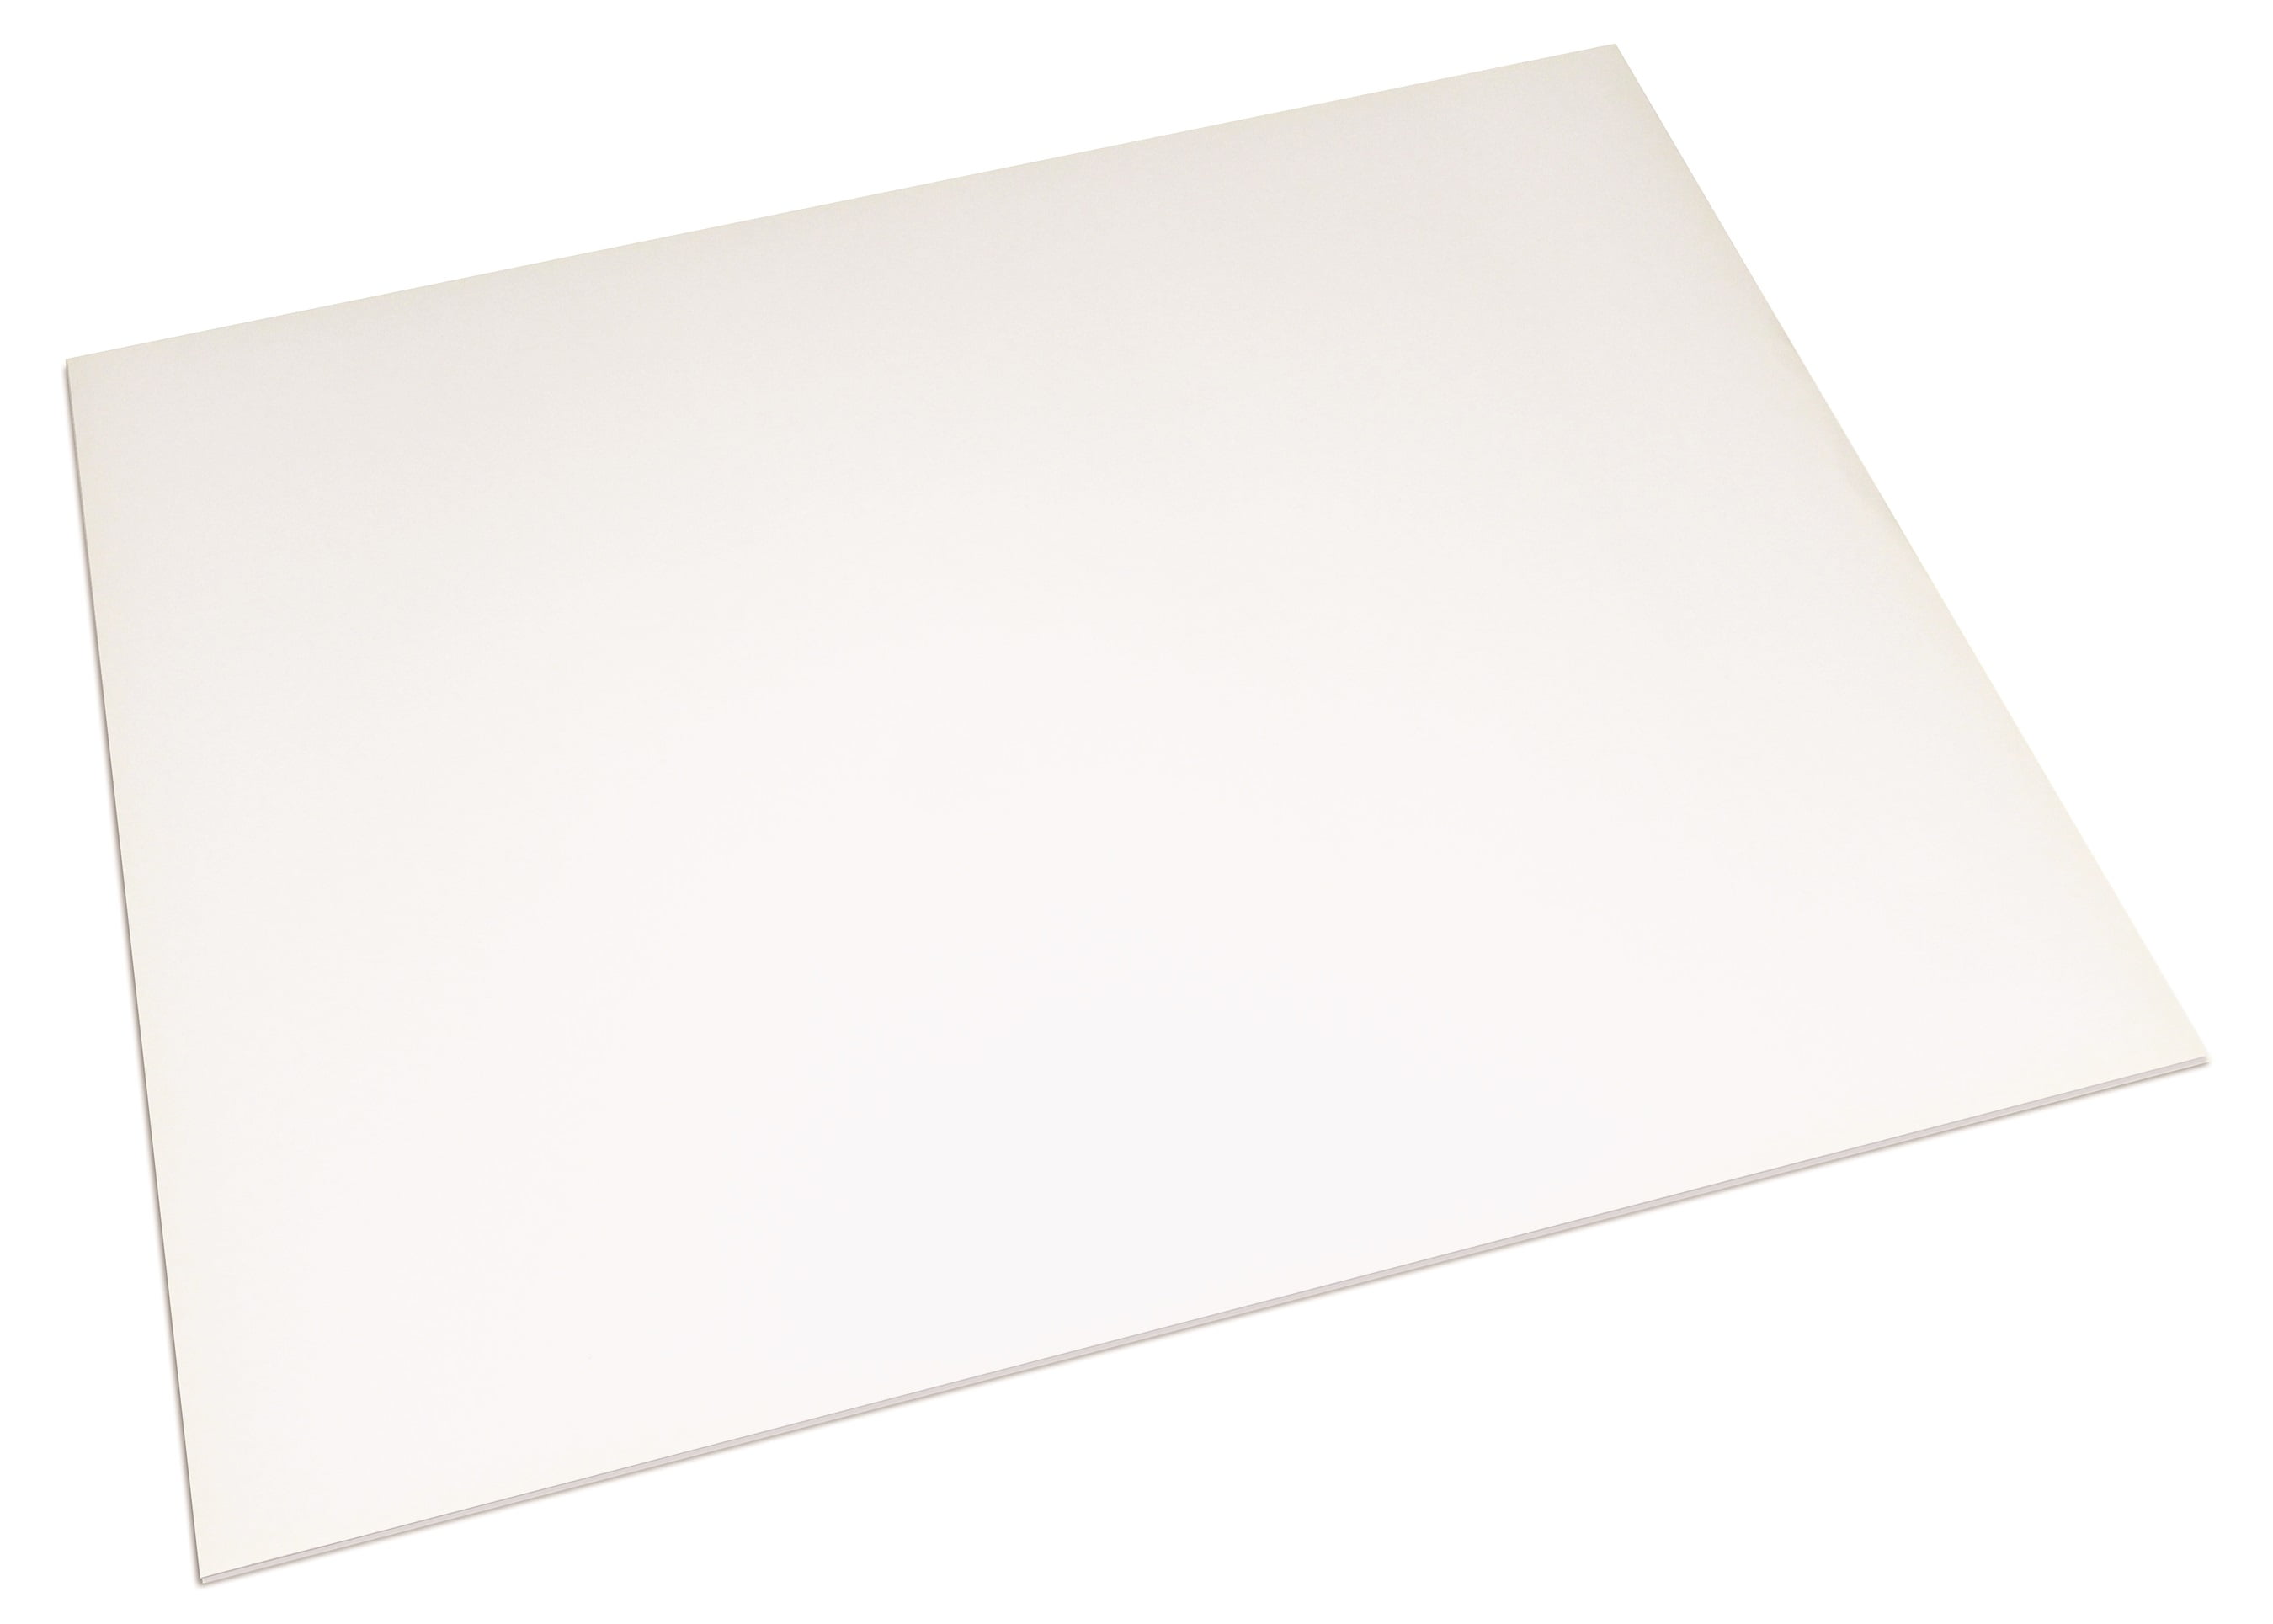 White Blank Multipurpose Playmat Play Mat Game PAD MAT 1/16 INCH Thick